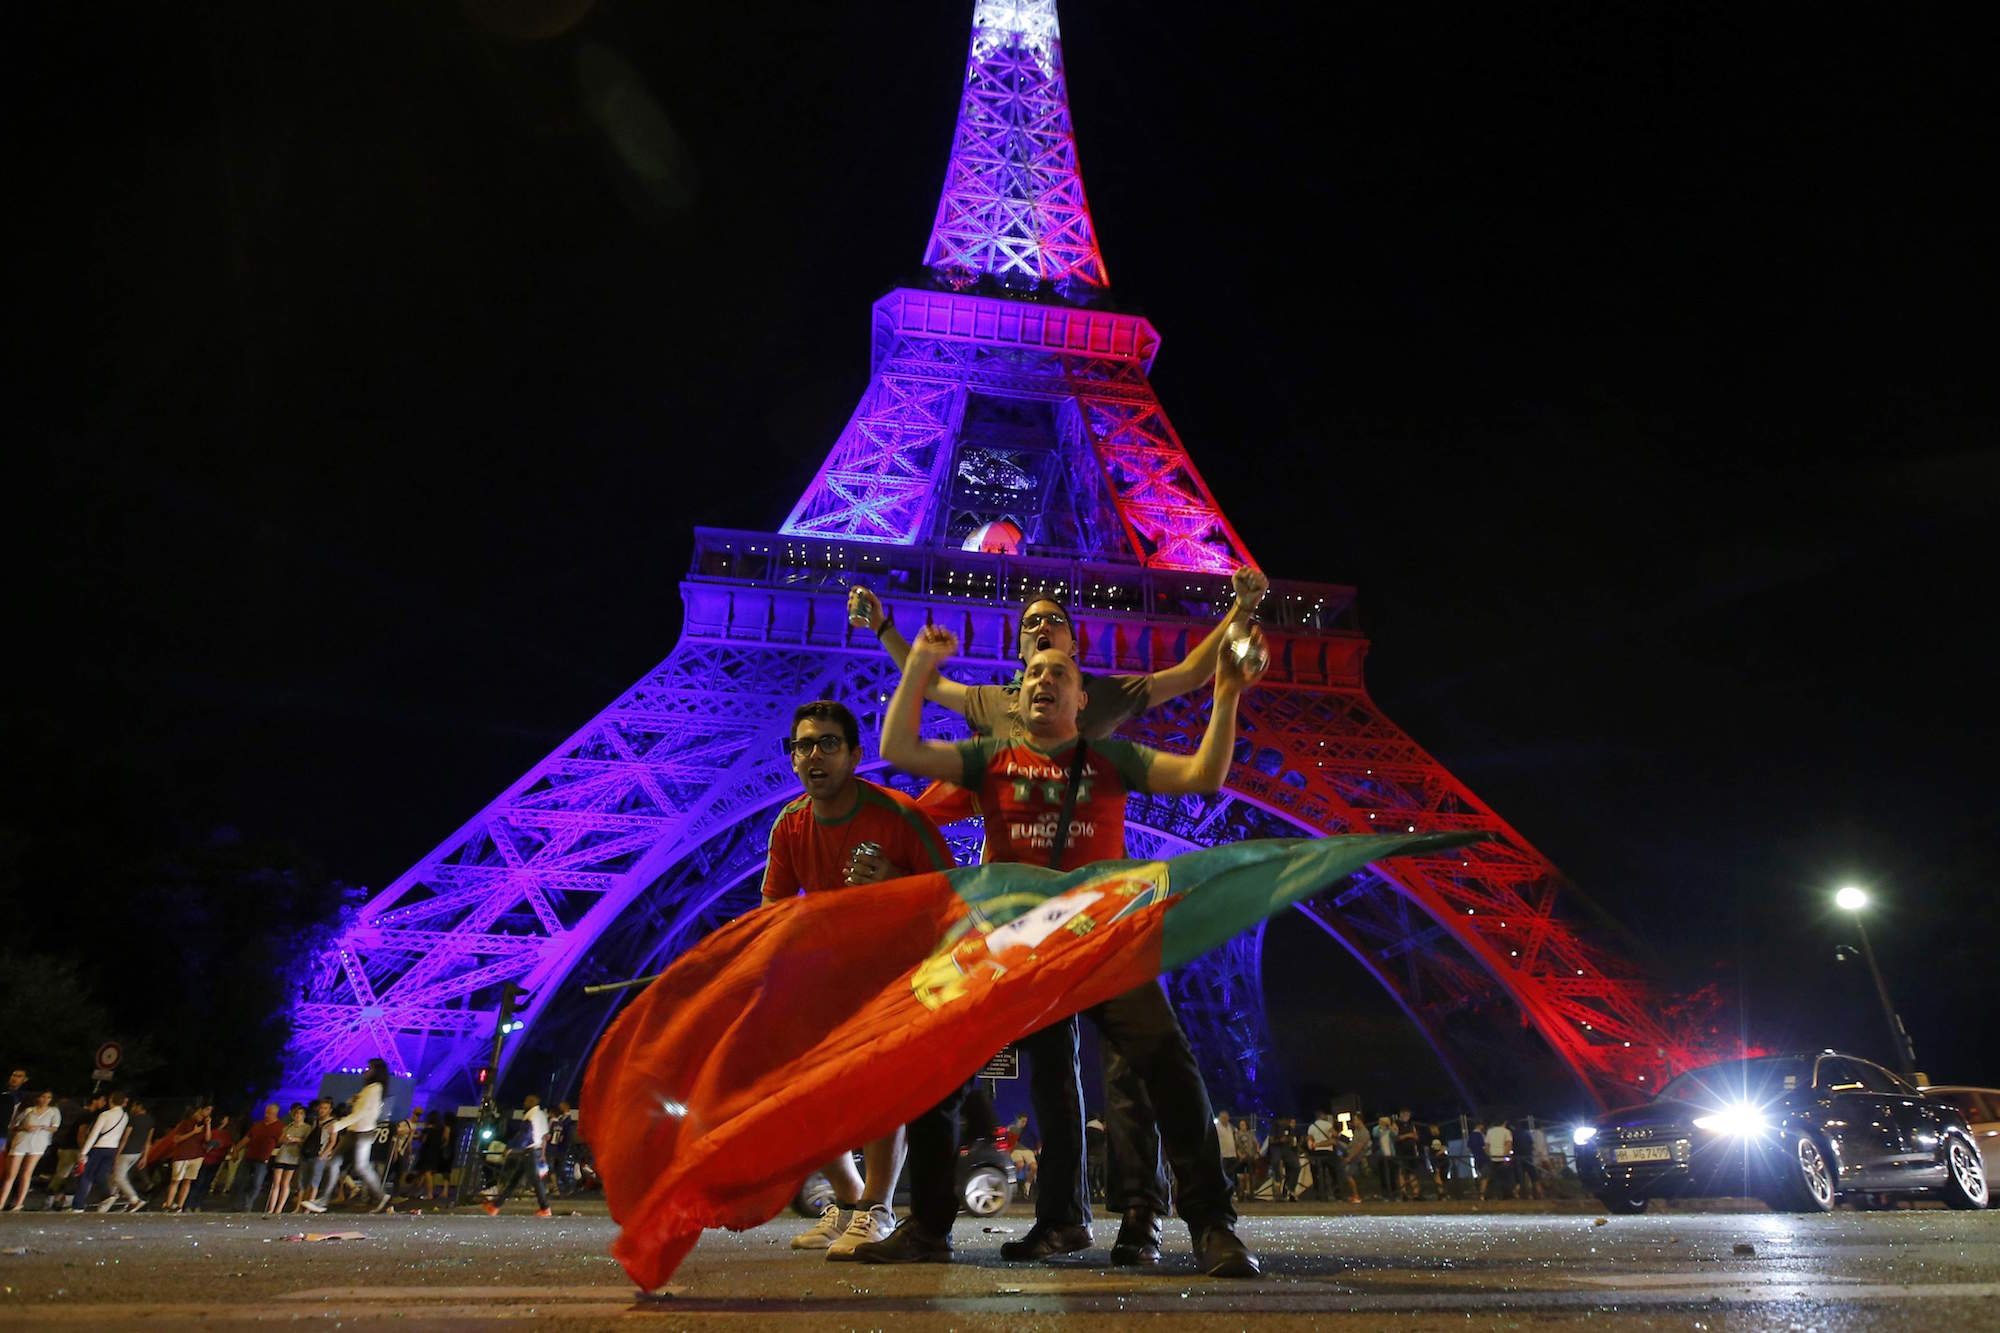 Portugal fans react near the Eiffel Tower after their team won in the Portugal v France EURO 2016 final soccer match in Paris, France, July 11, 2016. REUTERS/Stephane Mahe